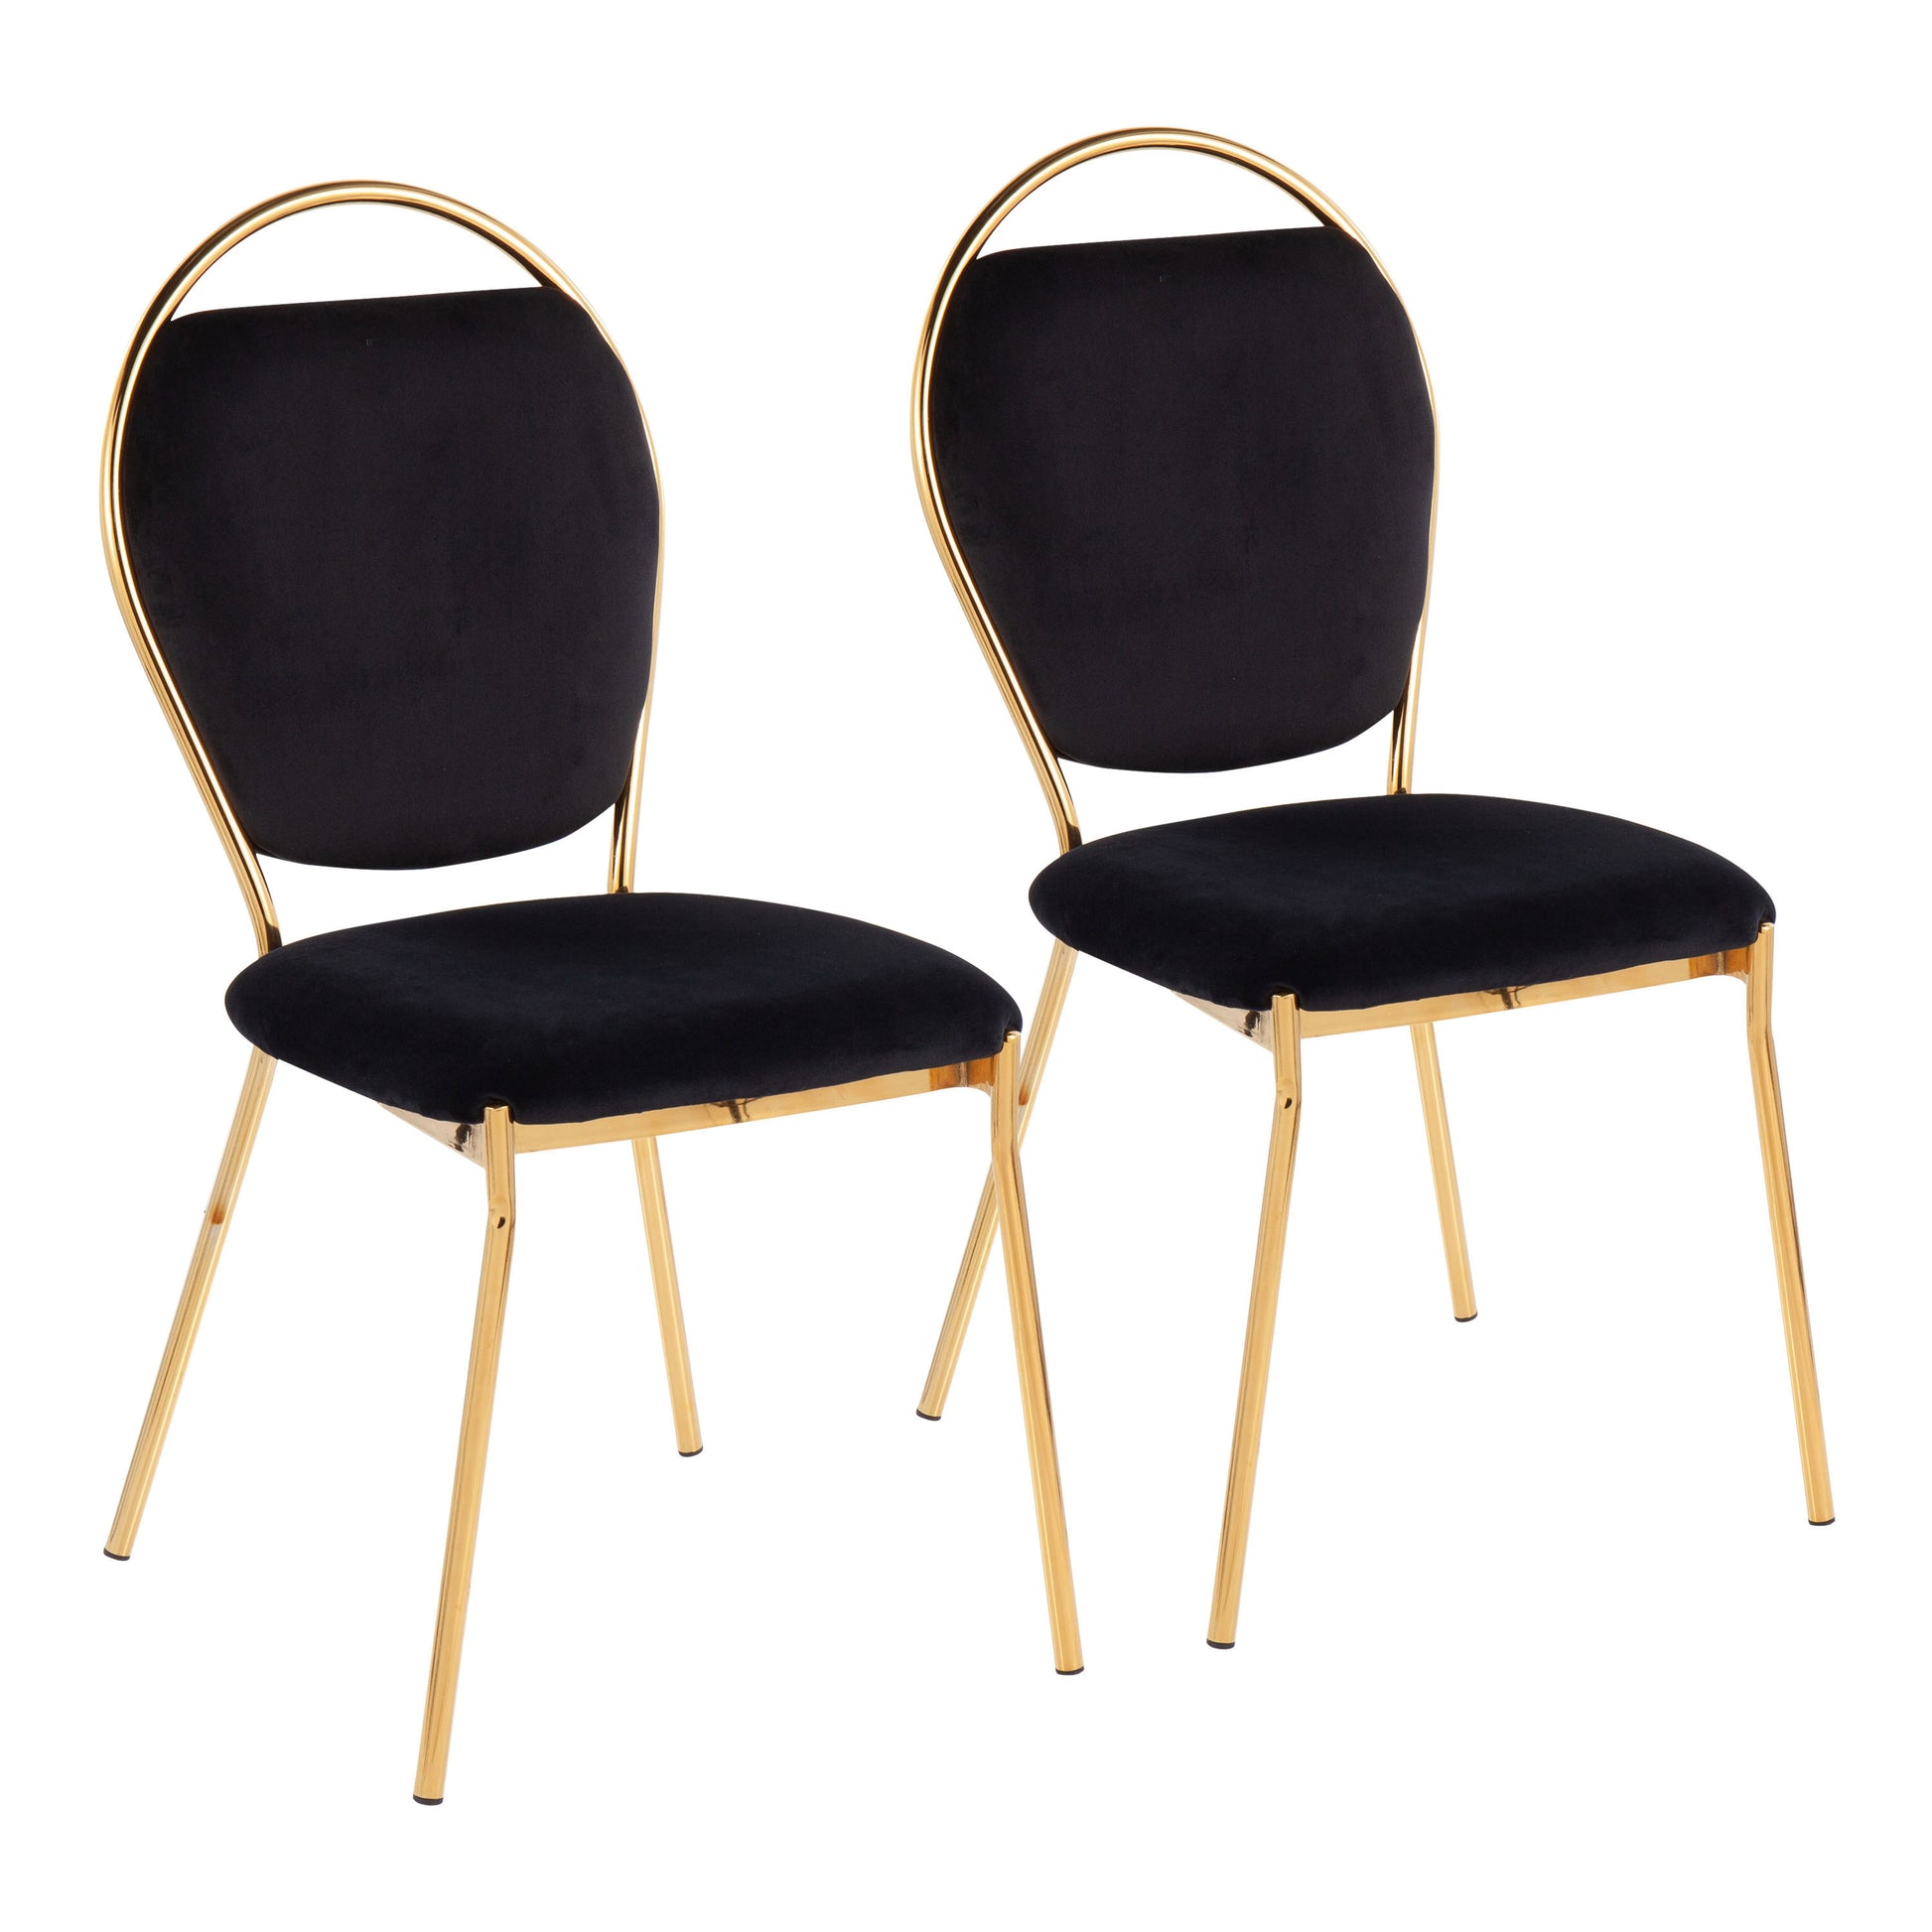 Keyhole Contemporary/Glam Dining Chair in Gold Metal and Black Velvet by LumiSource - Set of 2 - Enova Luxe Home Store